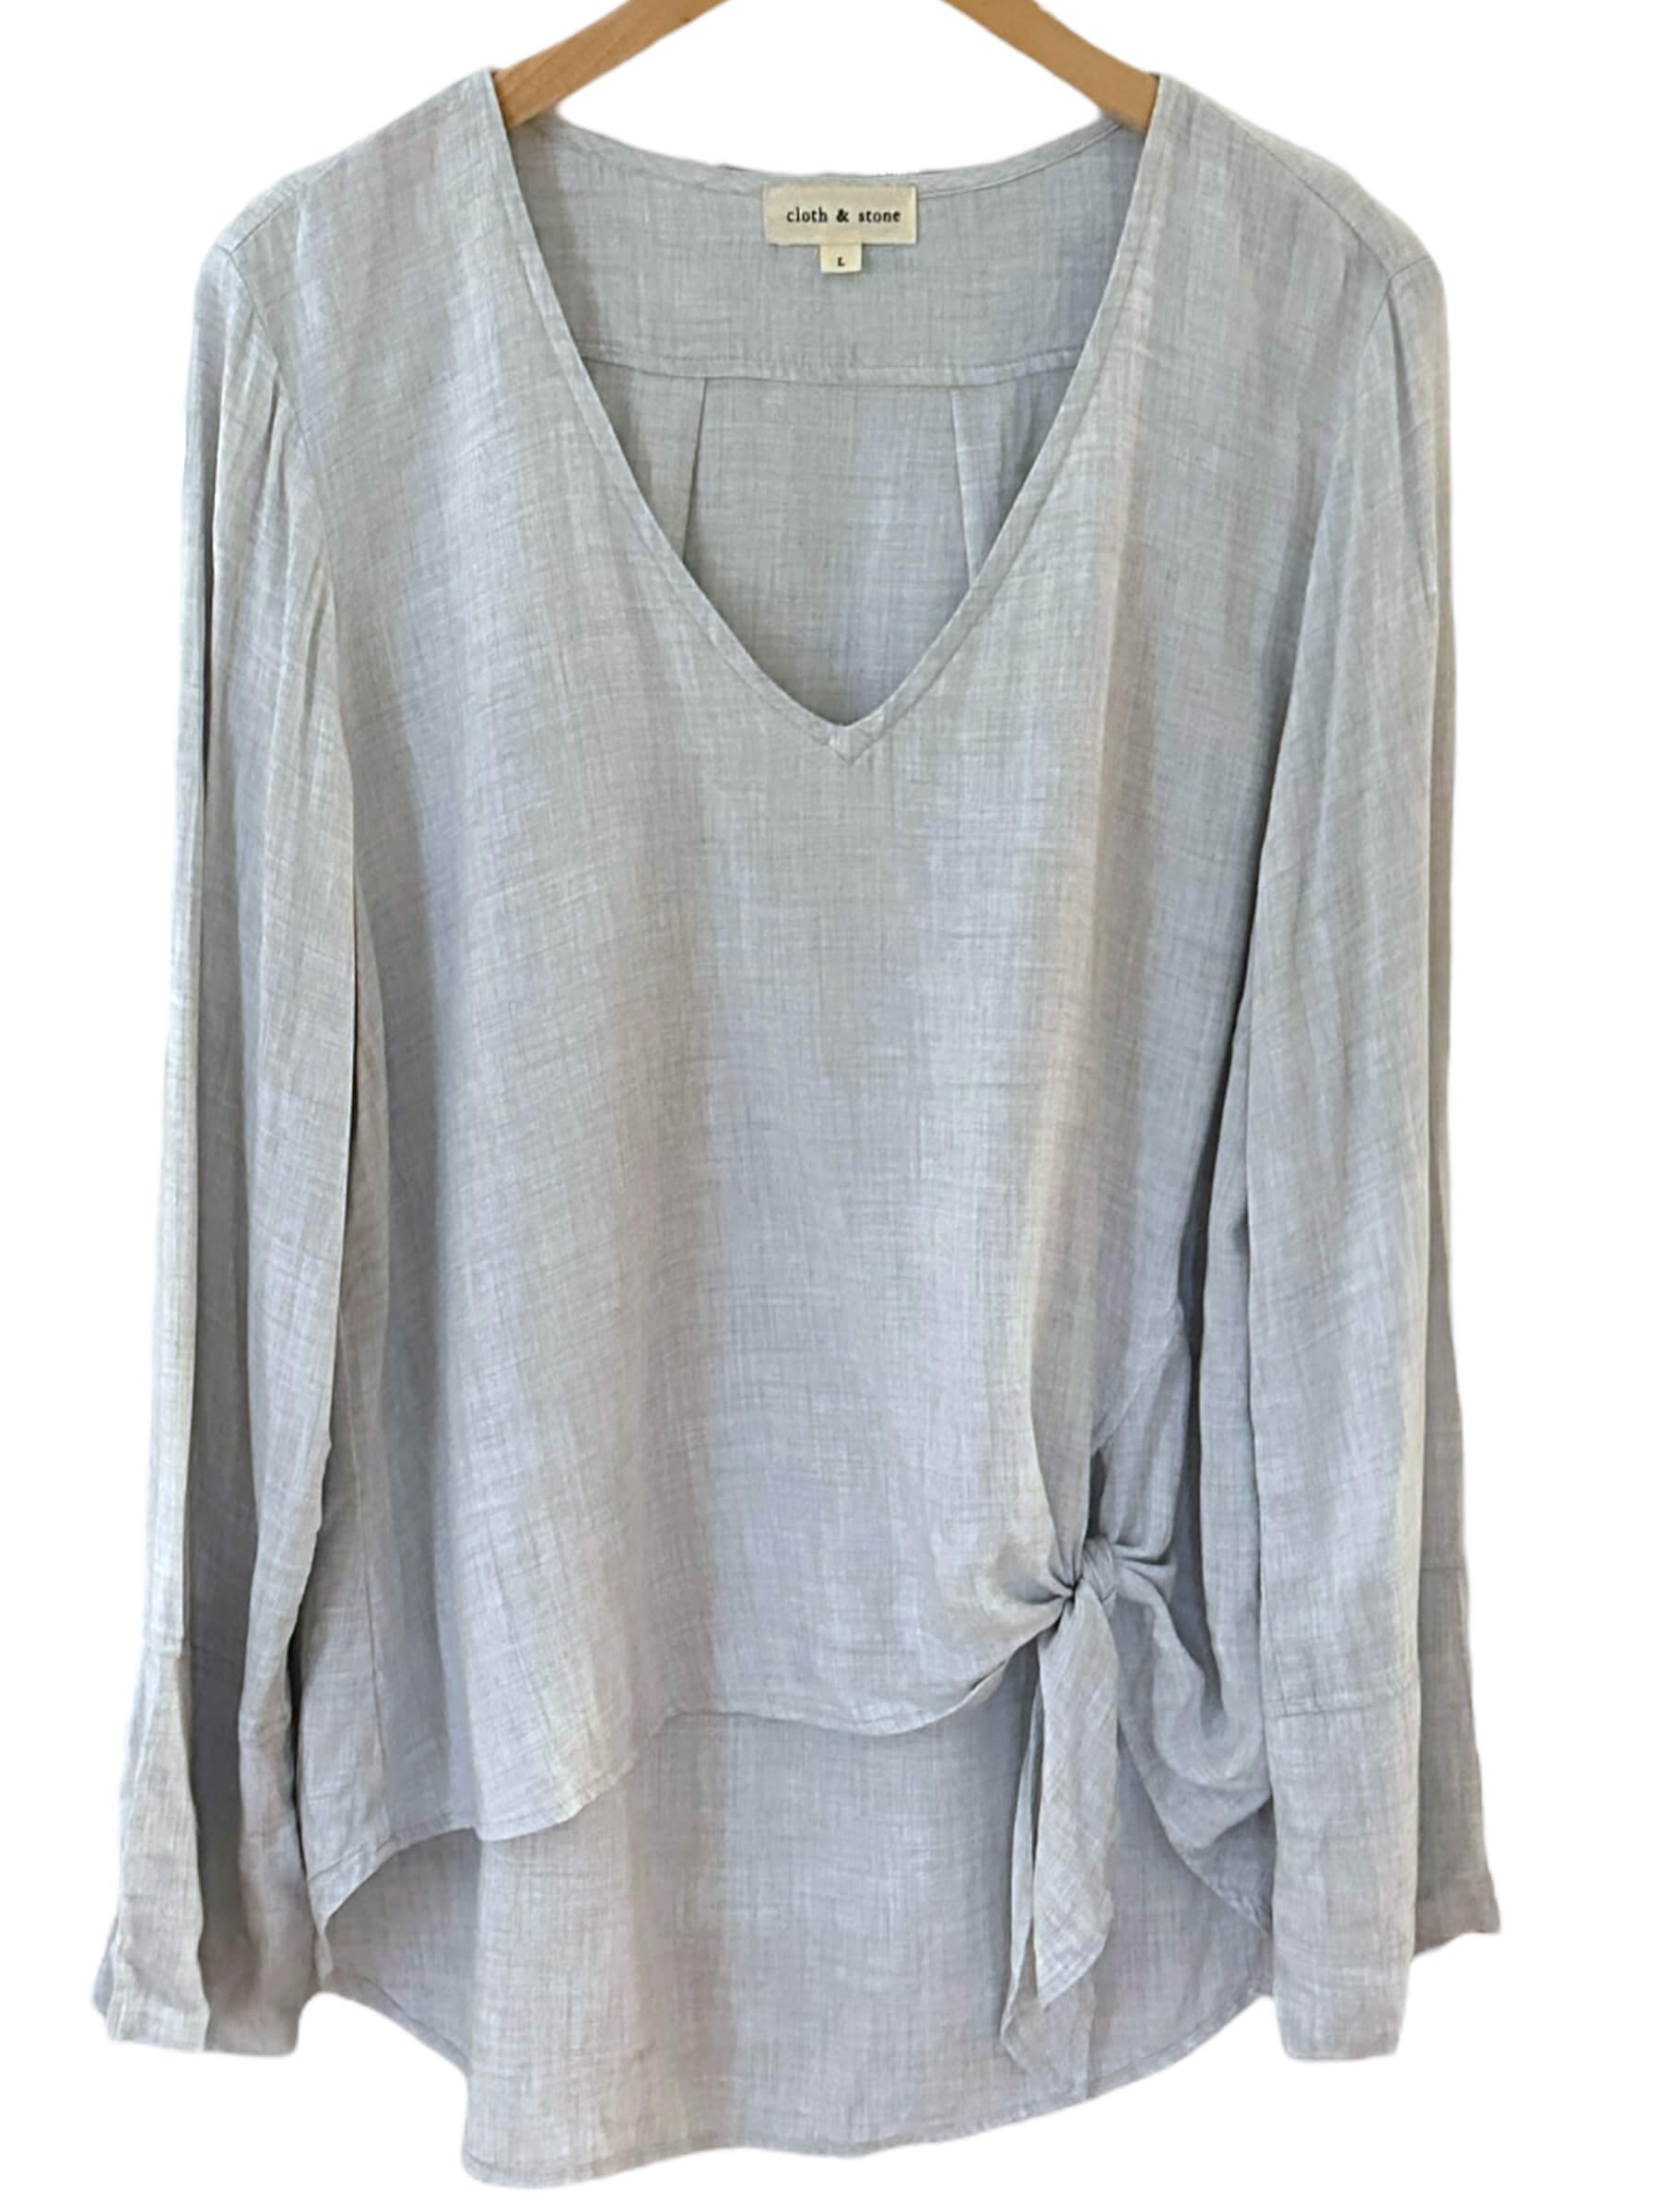 Soft Summer CLOTH & STONE pebble gray tie-front top